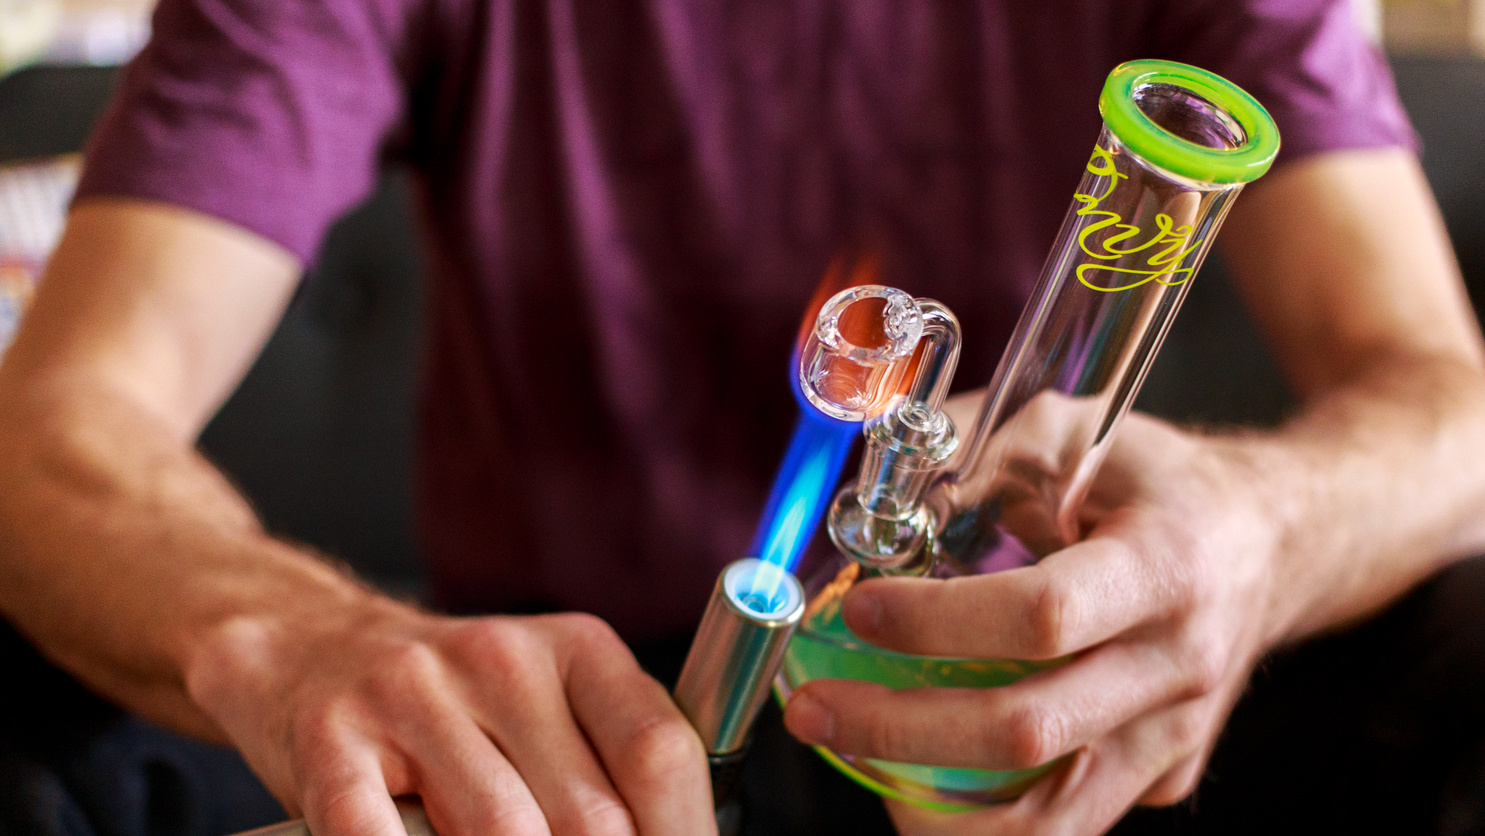 Dab Rig Basics: What are Dab Rigs? - 420 Science